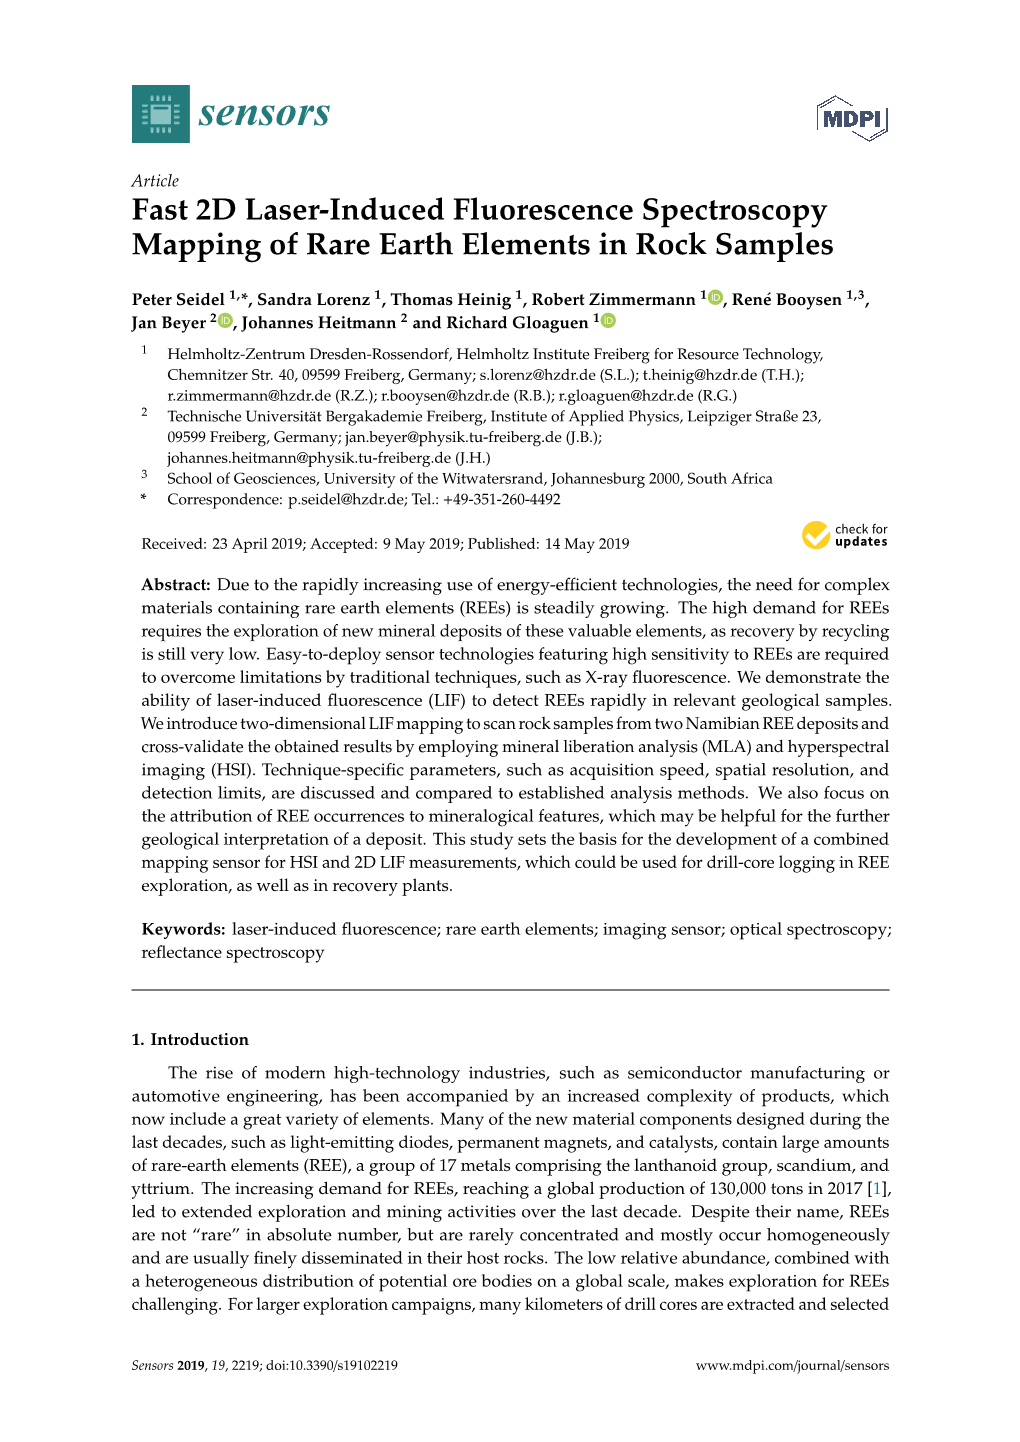 Fast 2D Laser-Induced Fluorescence Spectroscopy Mapping of Rare Earth Elements in Rock Samples